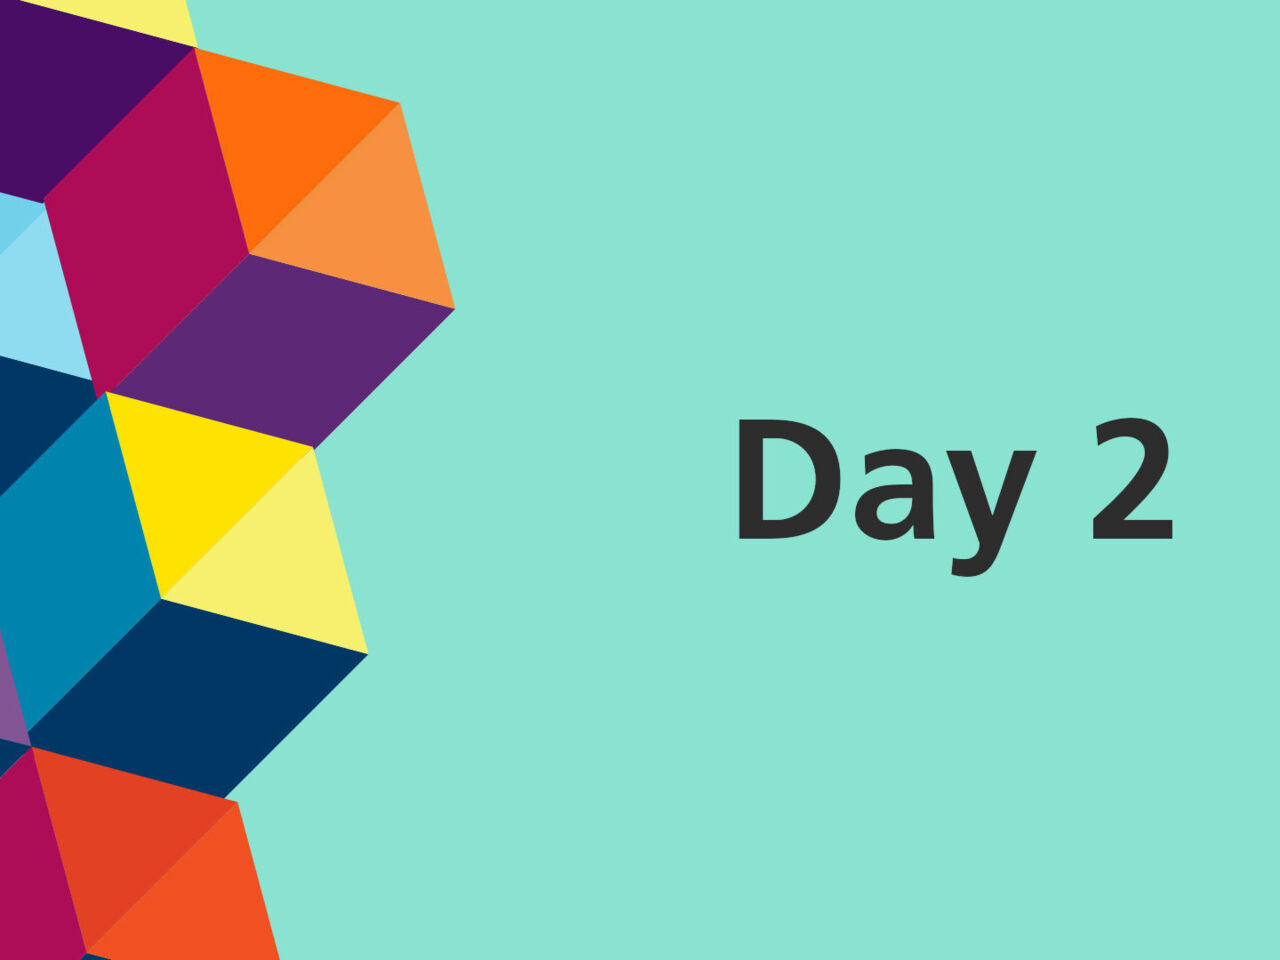 Green skills leading the way – Day 2 of WorldSkills Conference 2021